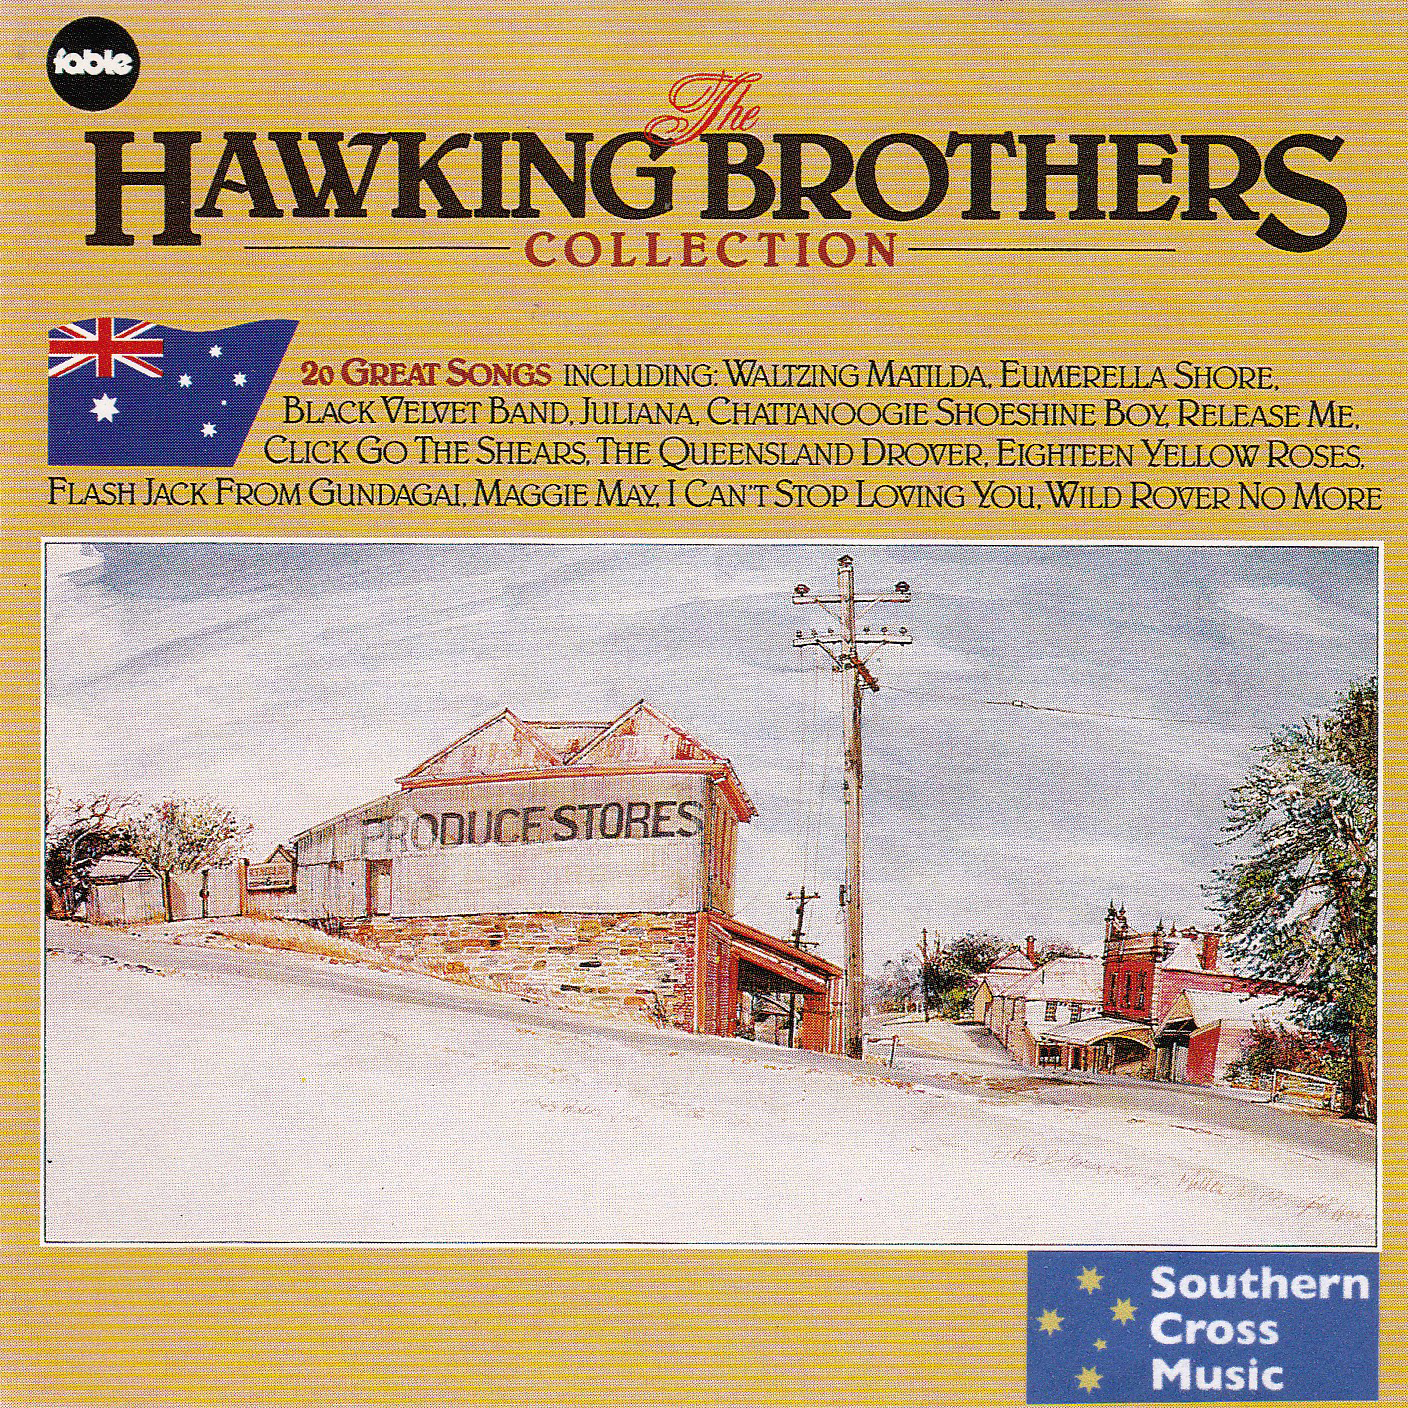 The Hawking brothers Collection